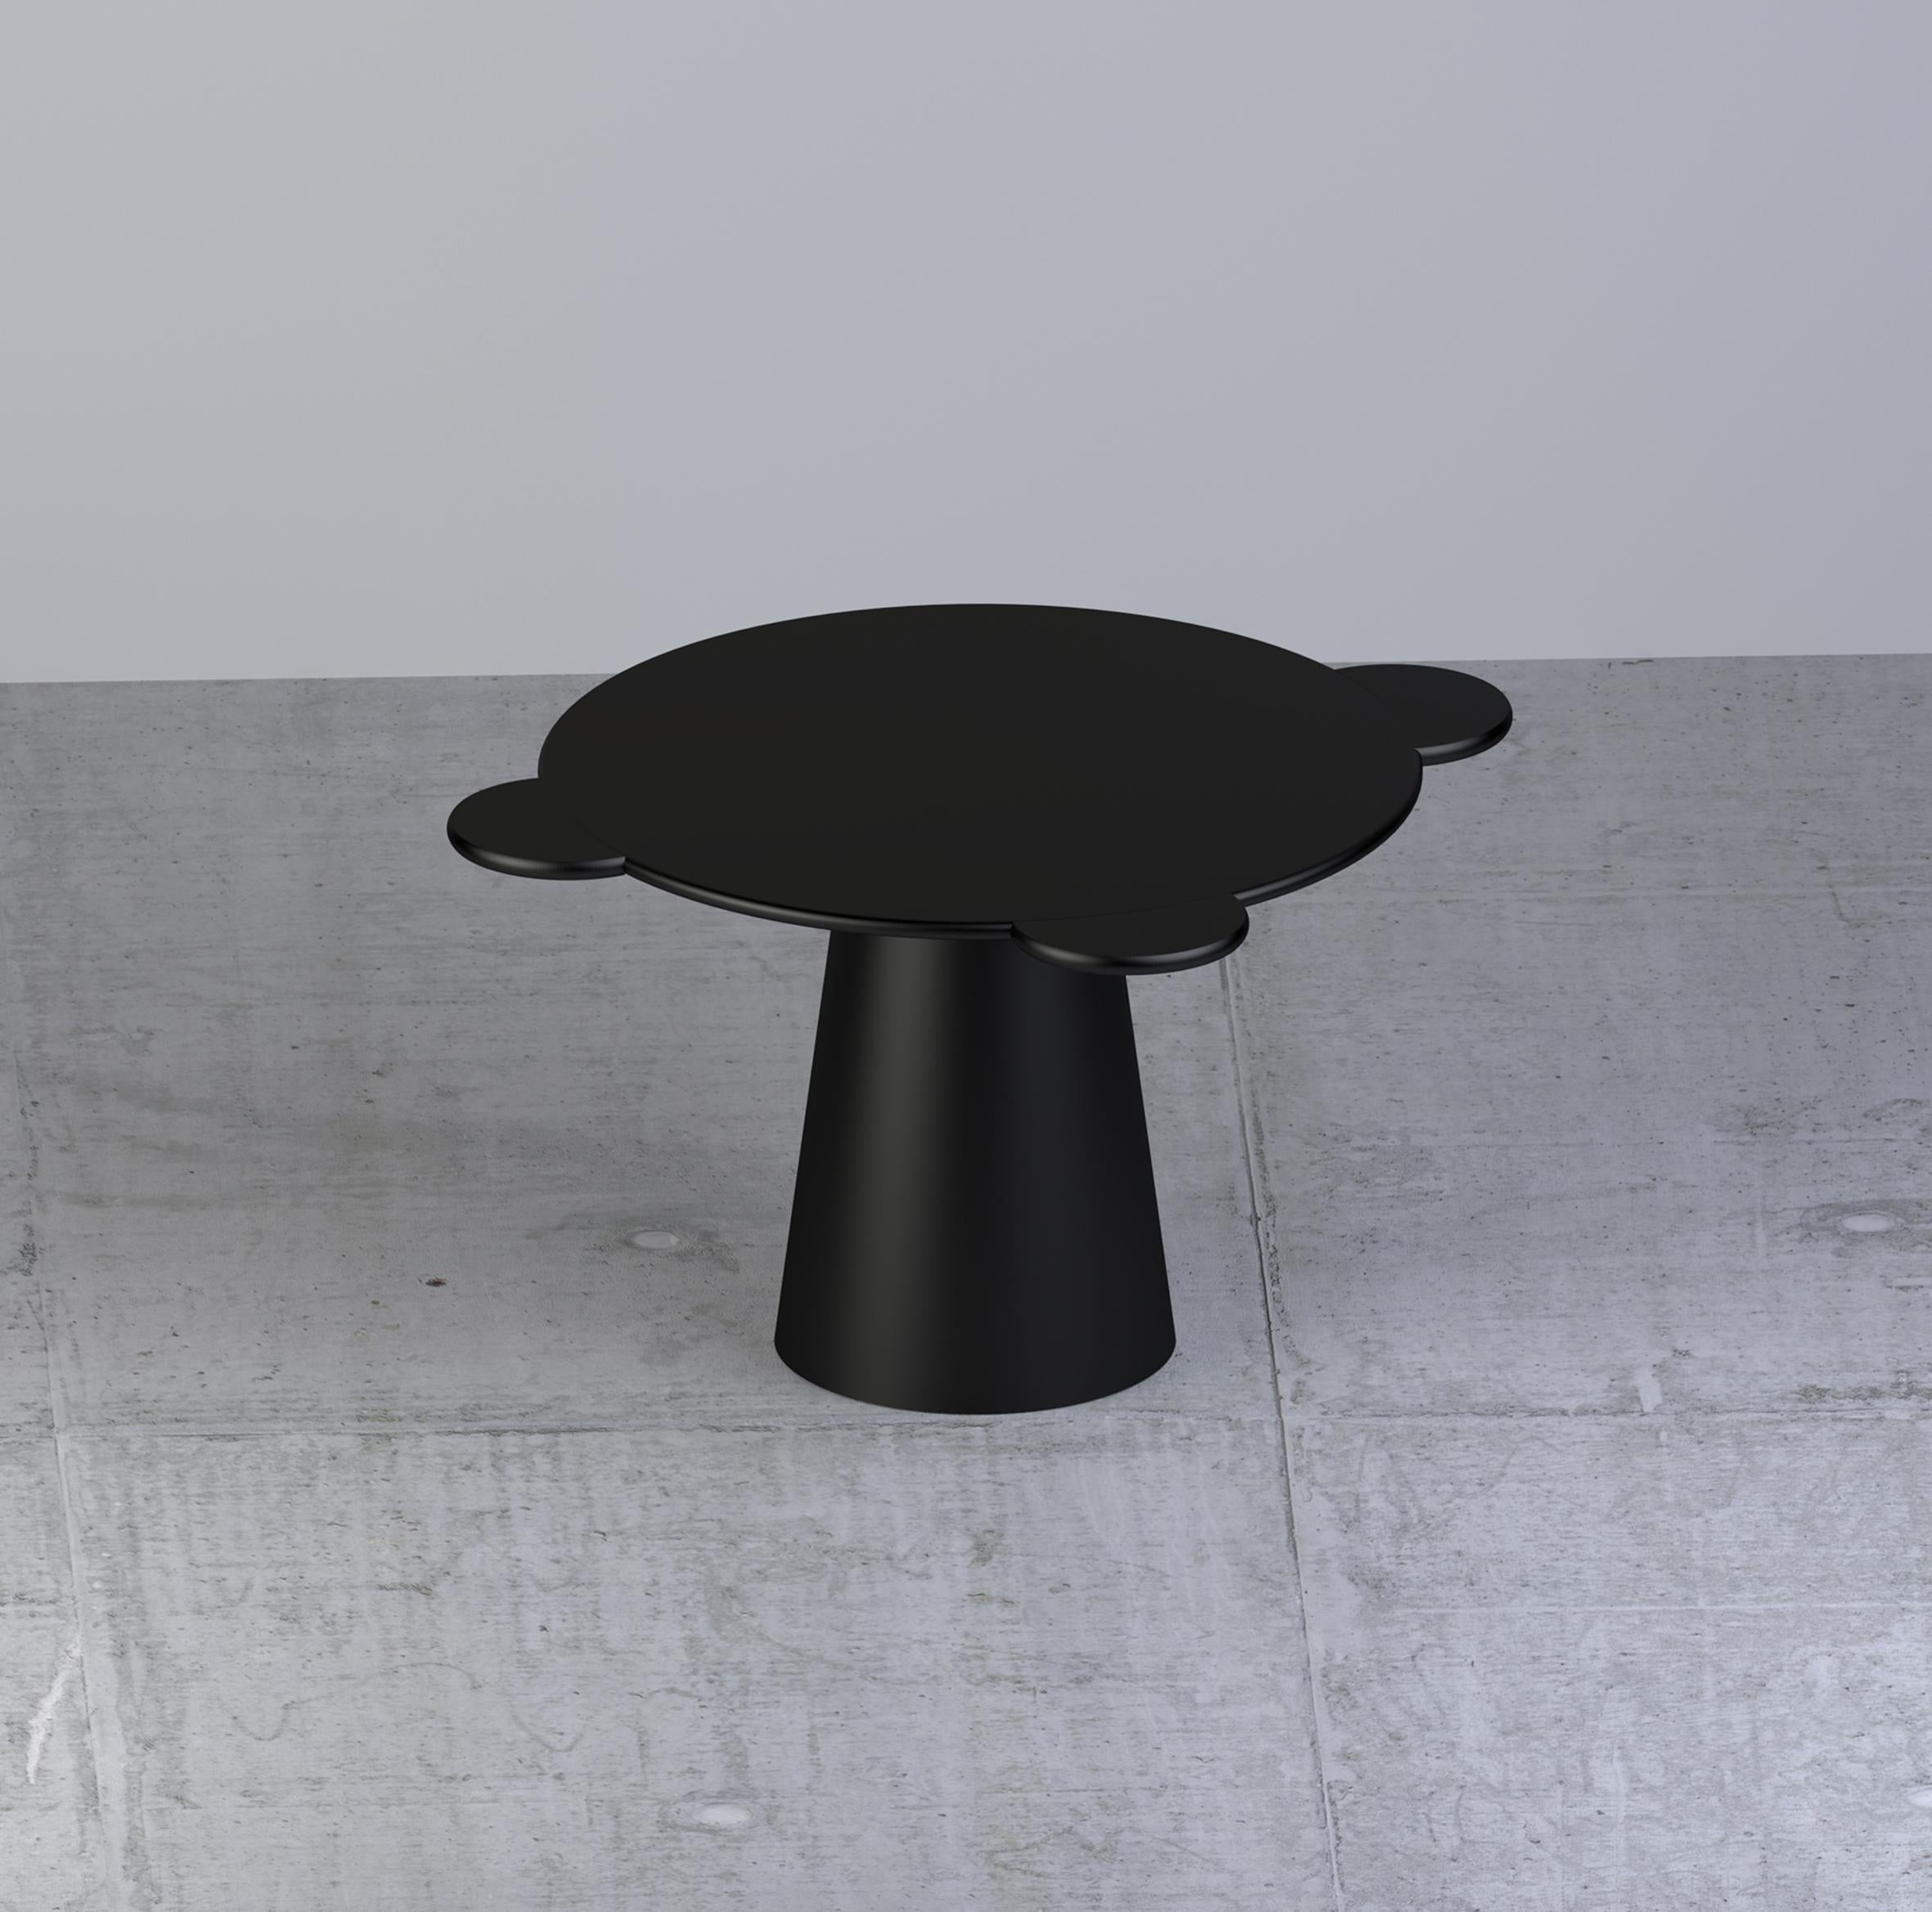 Donald is a multifunctional table with a sculpturally cosmic aspect and colorful circular shapes.

The sculptural silhouette has a wooden structure composed of a truncated cone that supports a round top adorned with three semi-circular flaps,